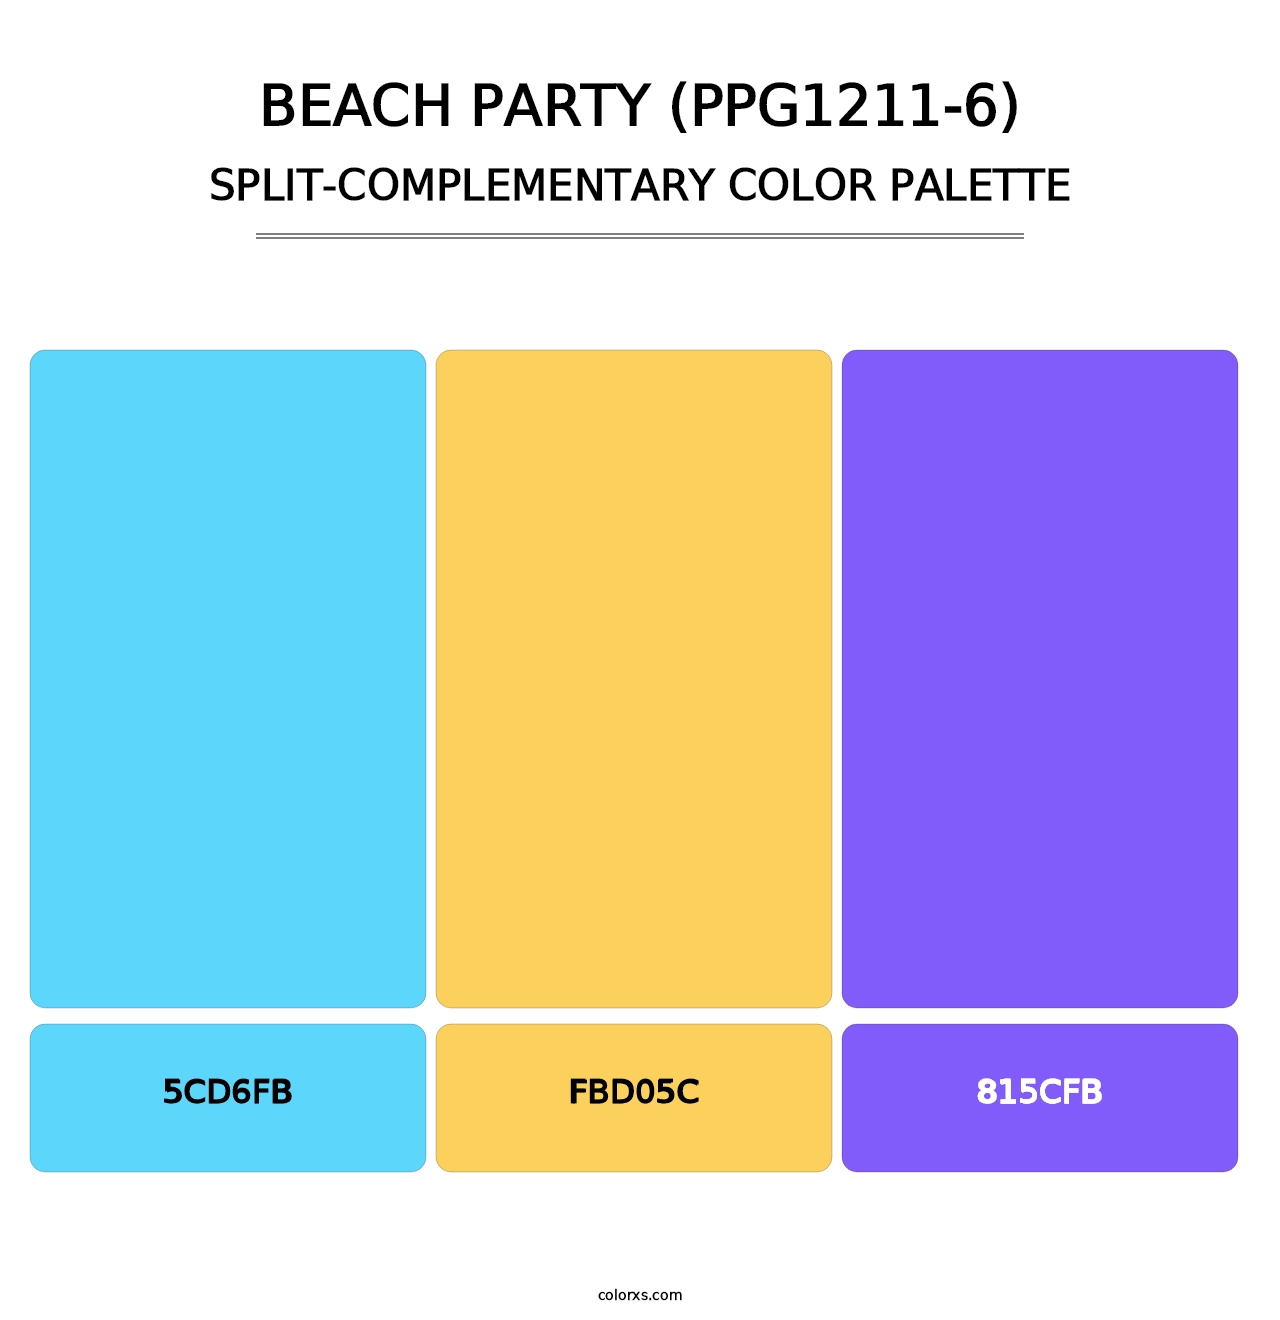 Beach Party (PPG1211-6) - Split-Complementary Color Palette